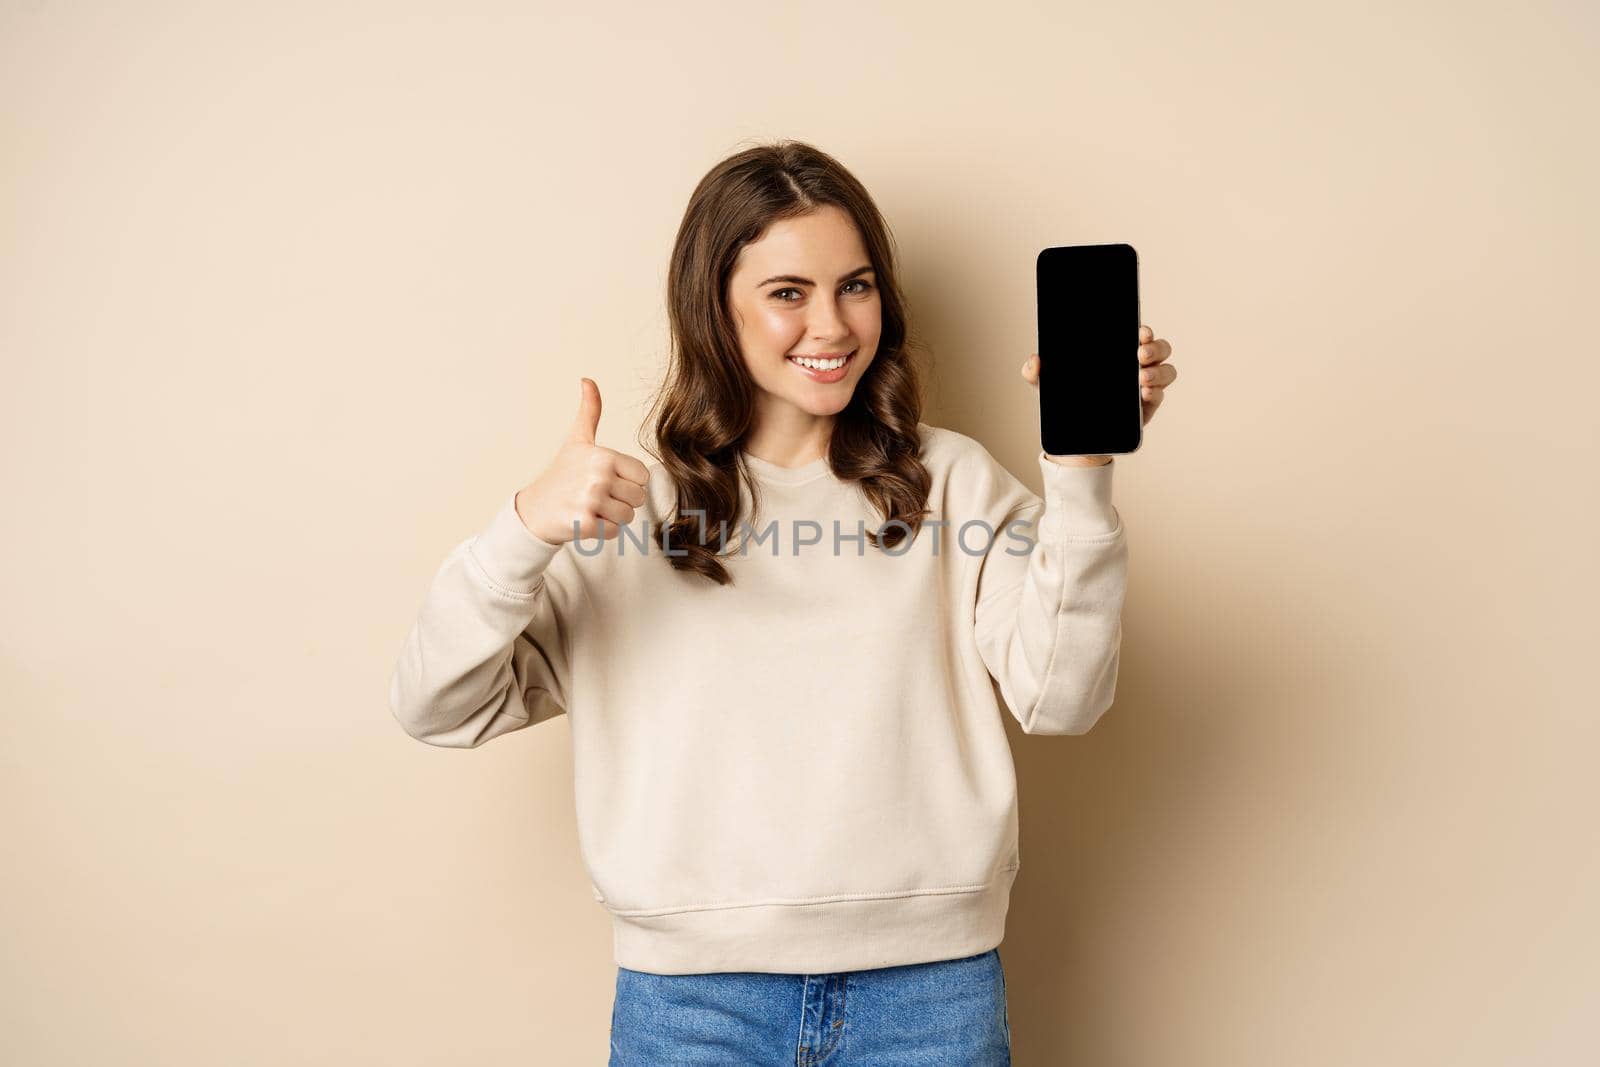 Attractive smiling woman showing thumbs up and smartphone screen, standing over beige background.